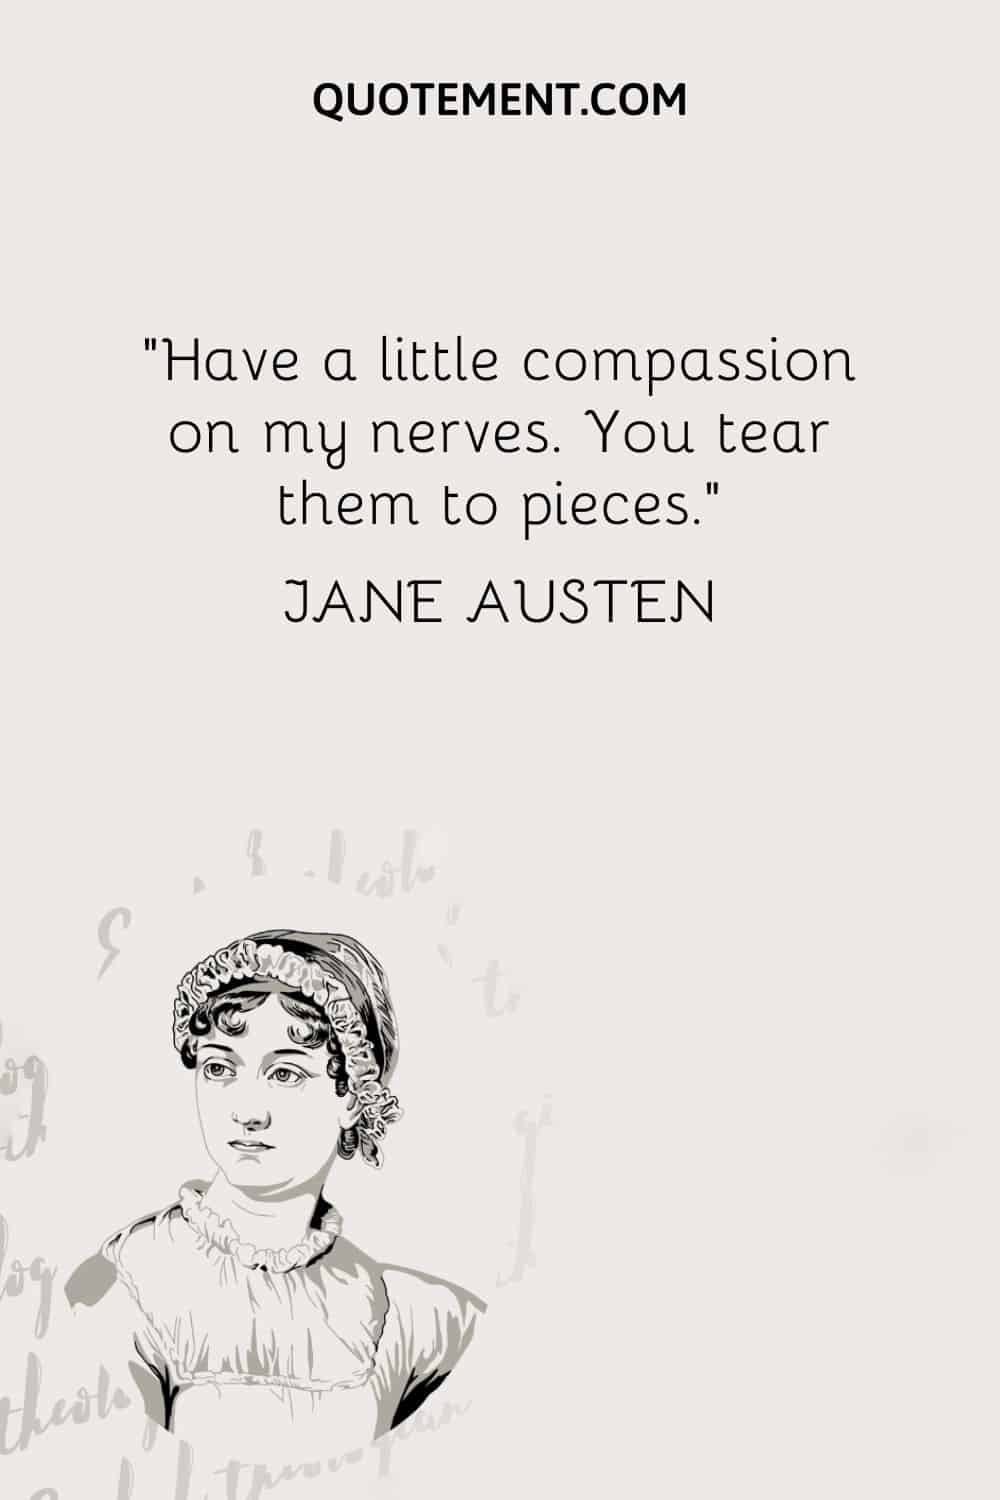 Have a little compassion on my nerves. You tear them to pieces. — Jane Austen